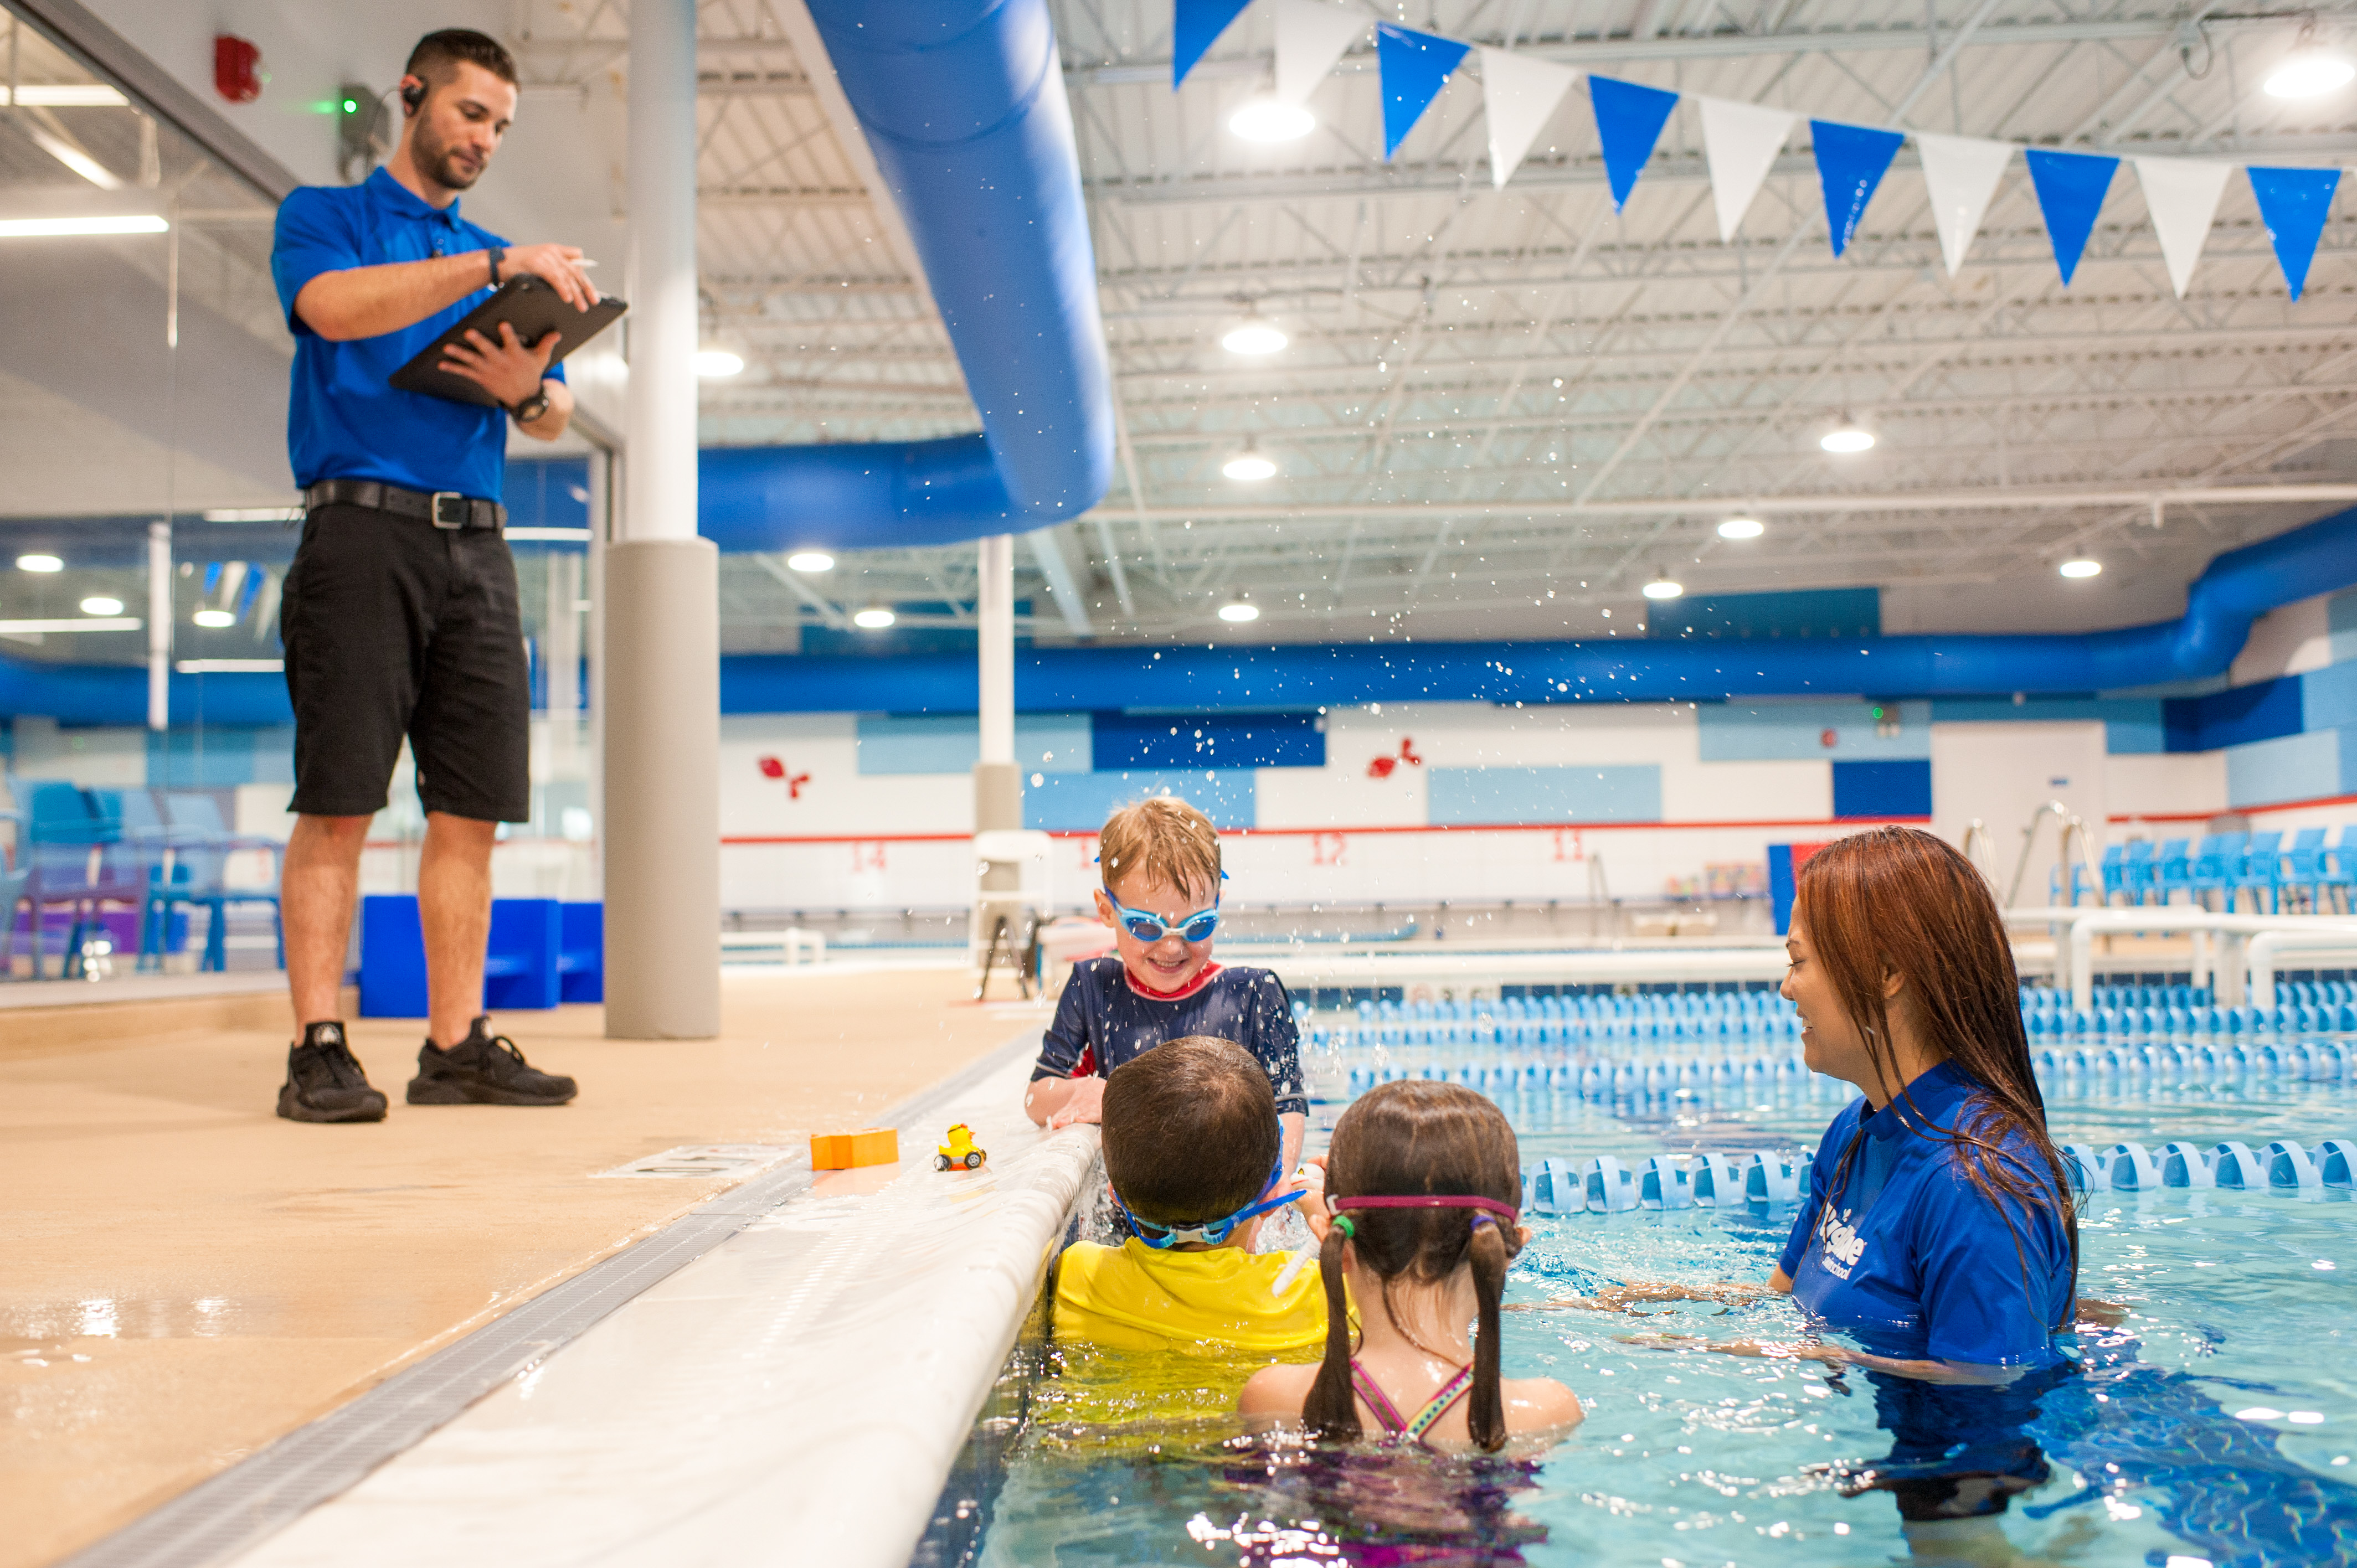 Manager tracks progress while during fun swimming lesson for kids